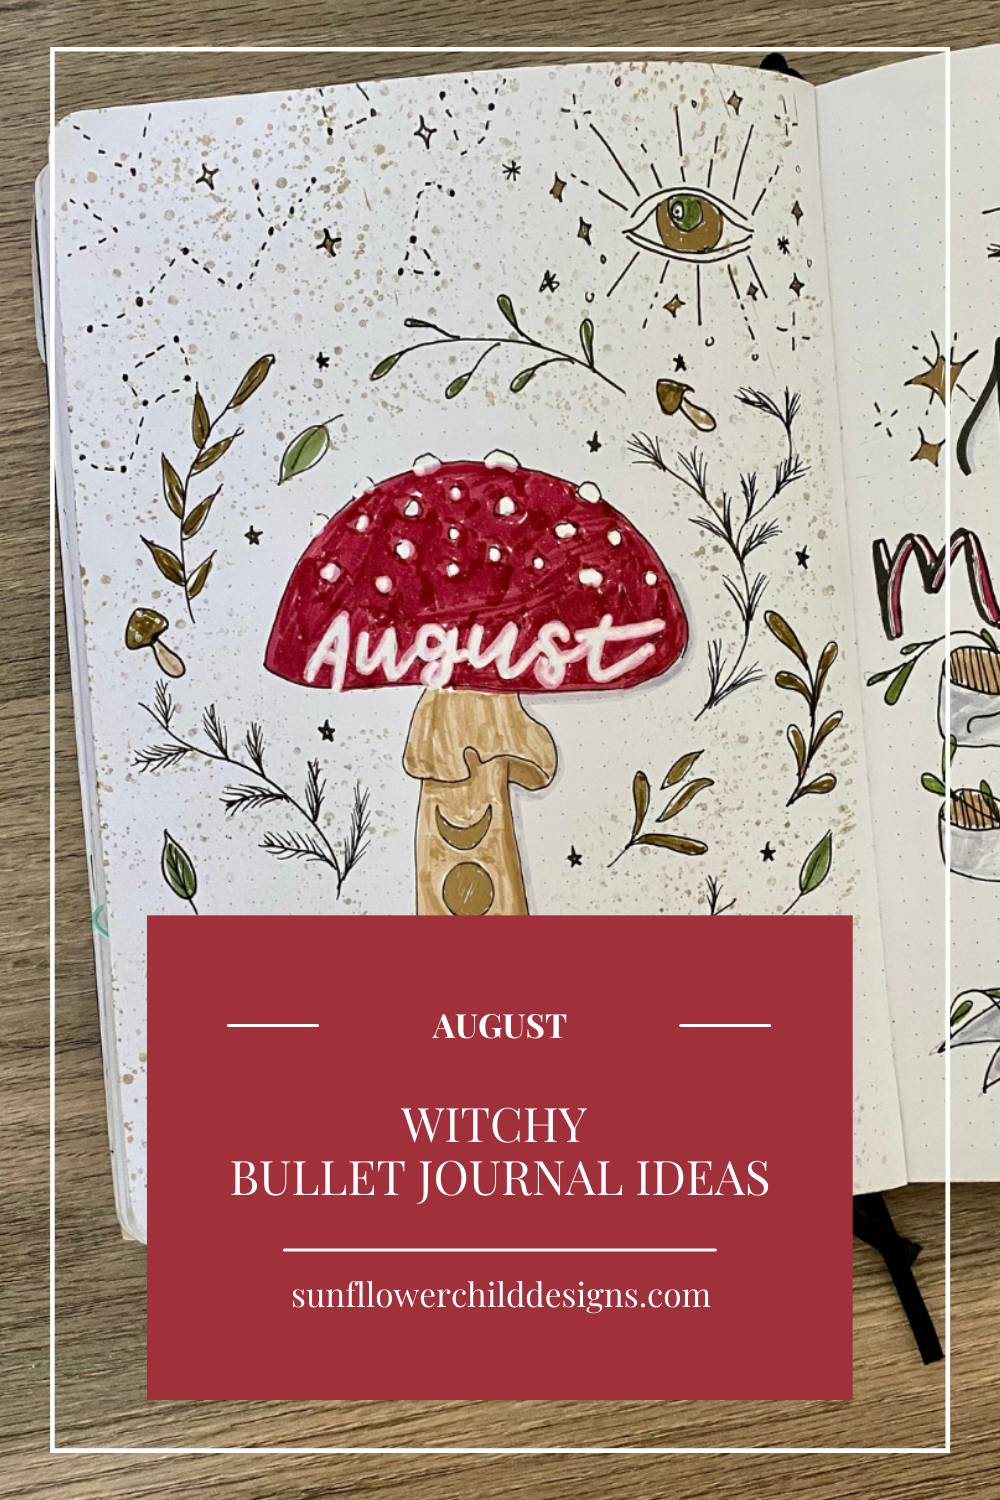 witchy-bullet-journal-ideas-august-bullet-journal-ideas 3.png